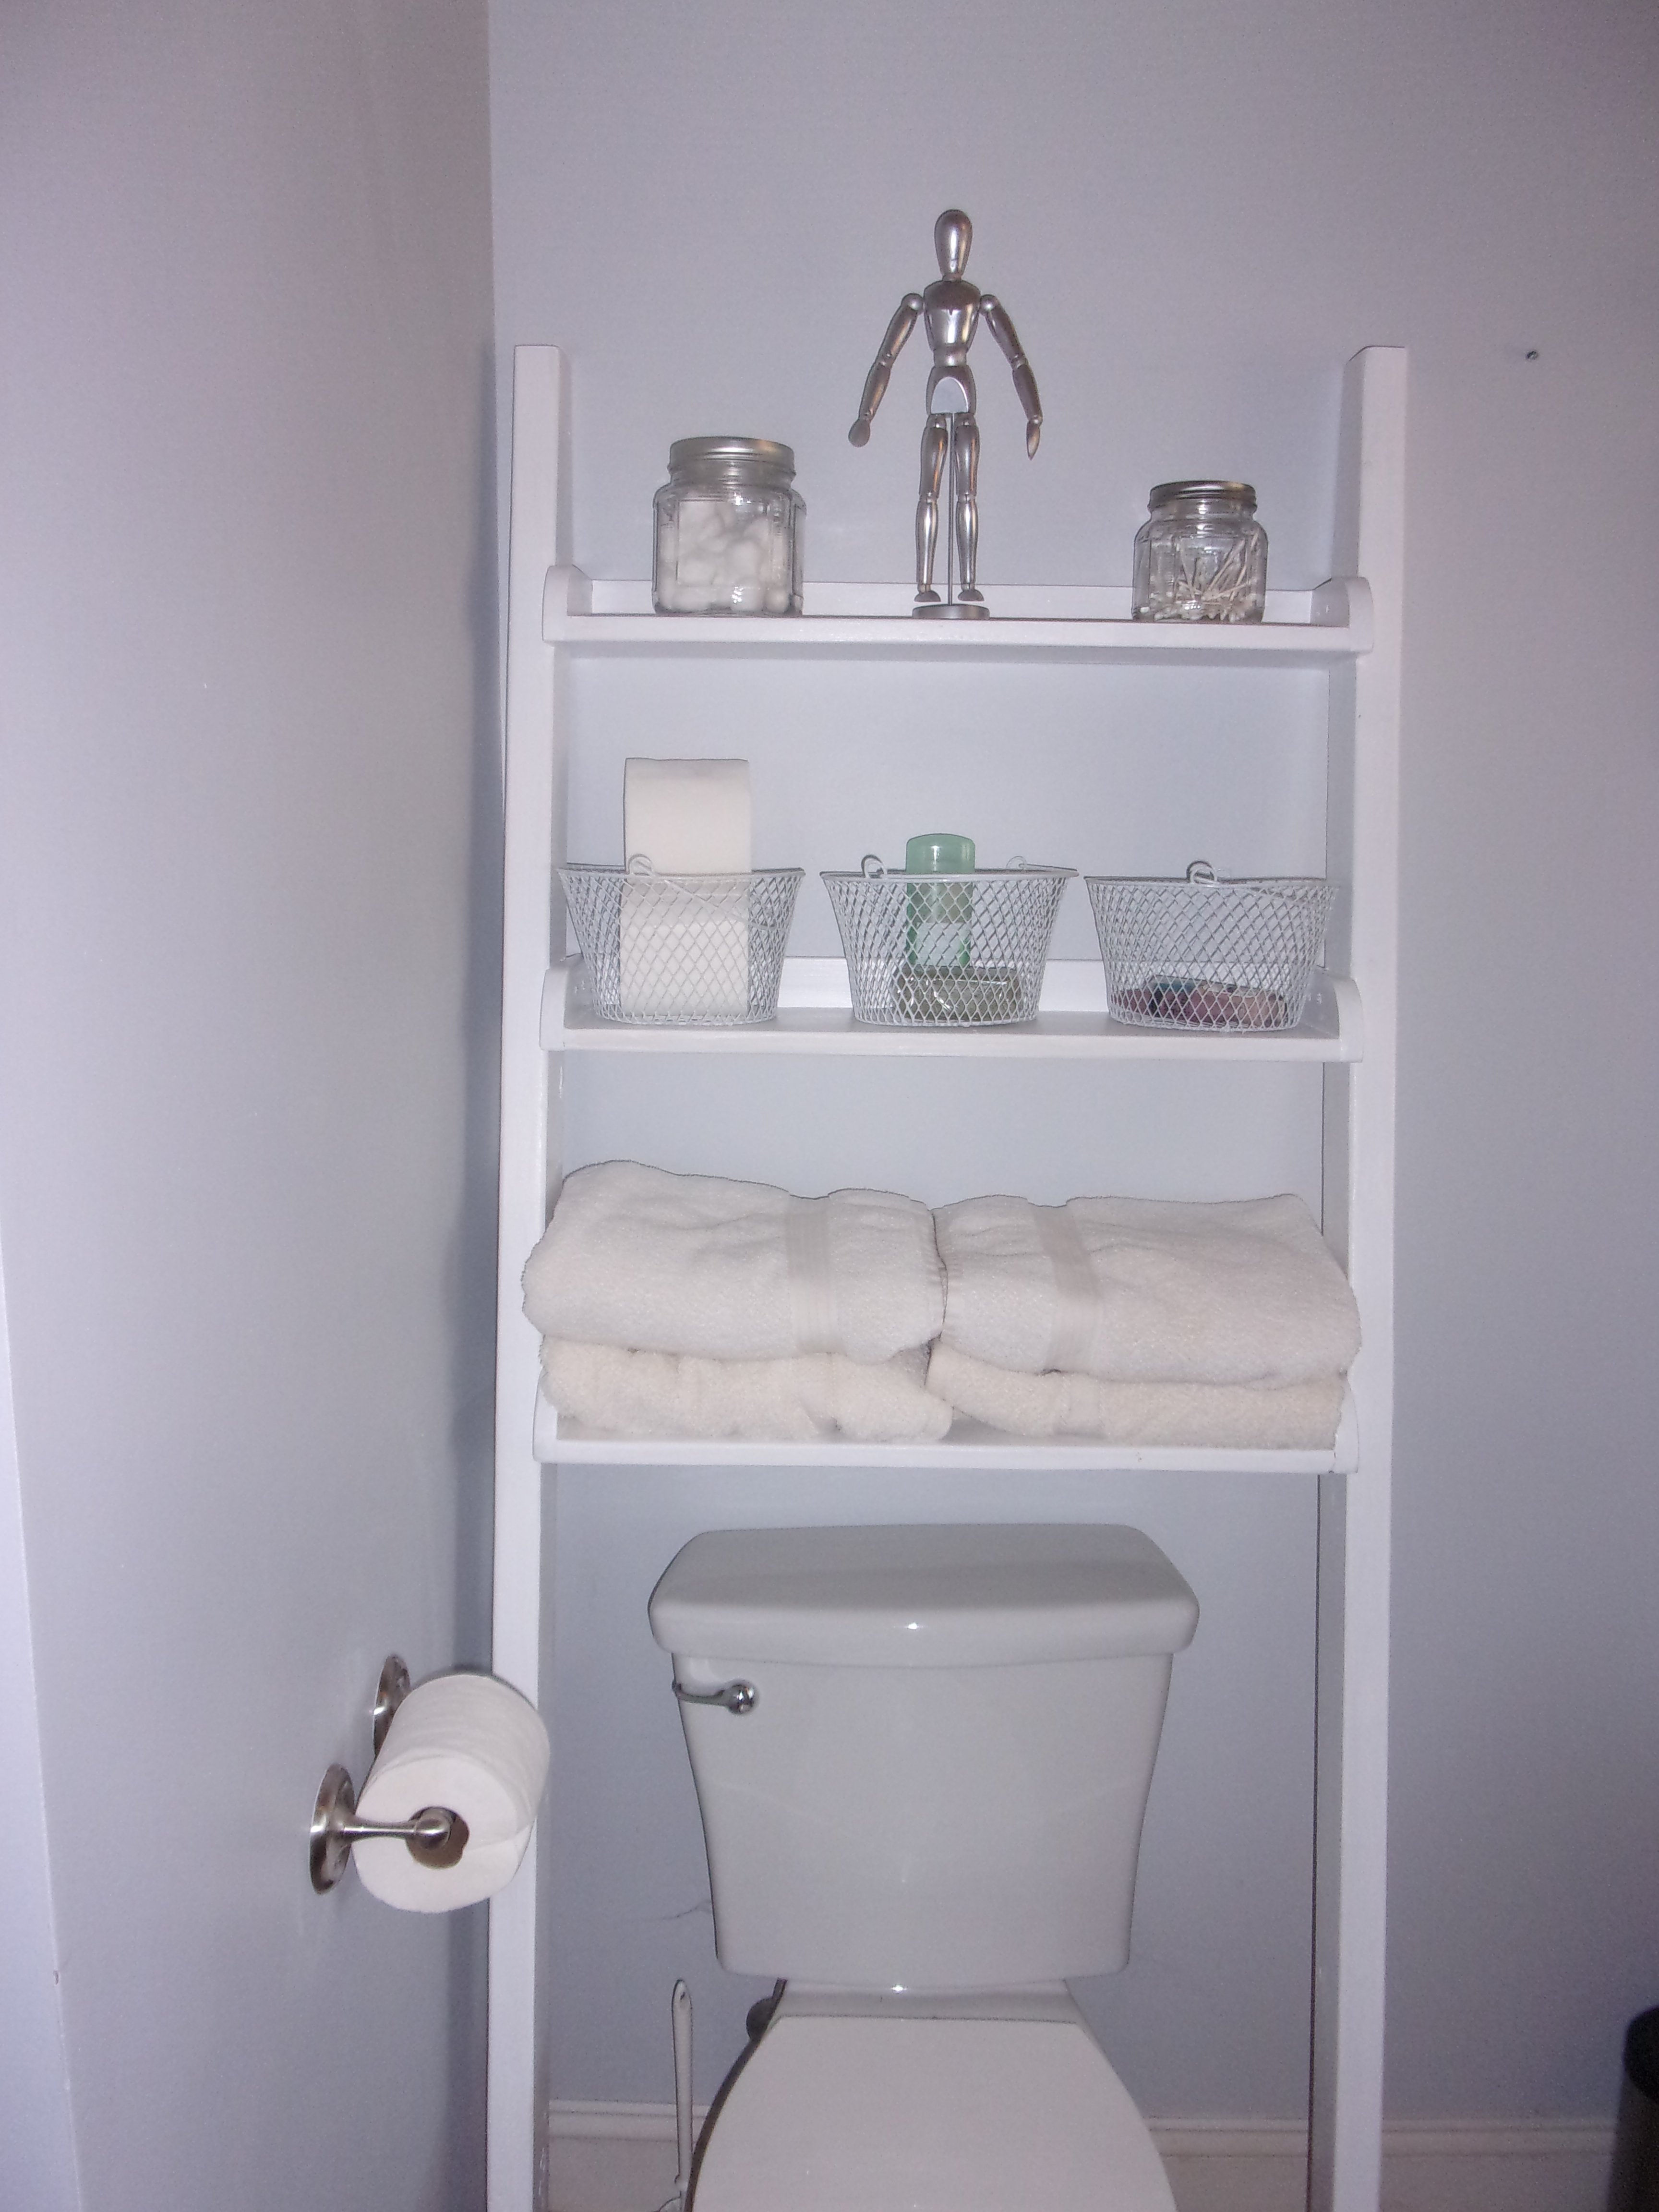 Ana White Leaning Ladder over toilet shelf DIY Projects